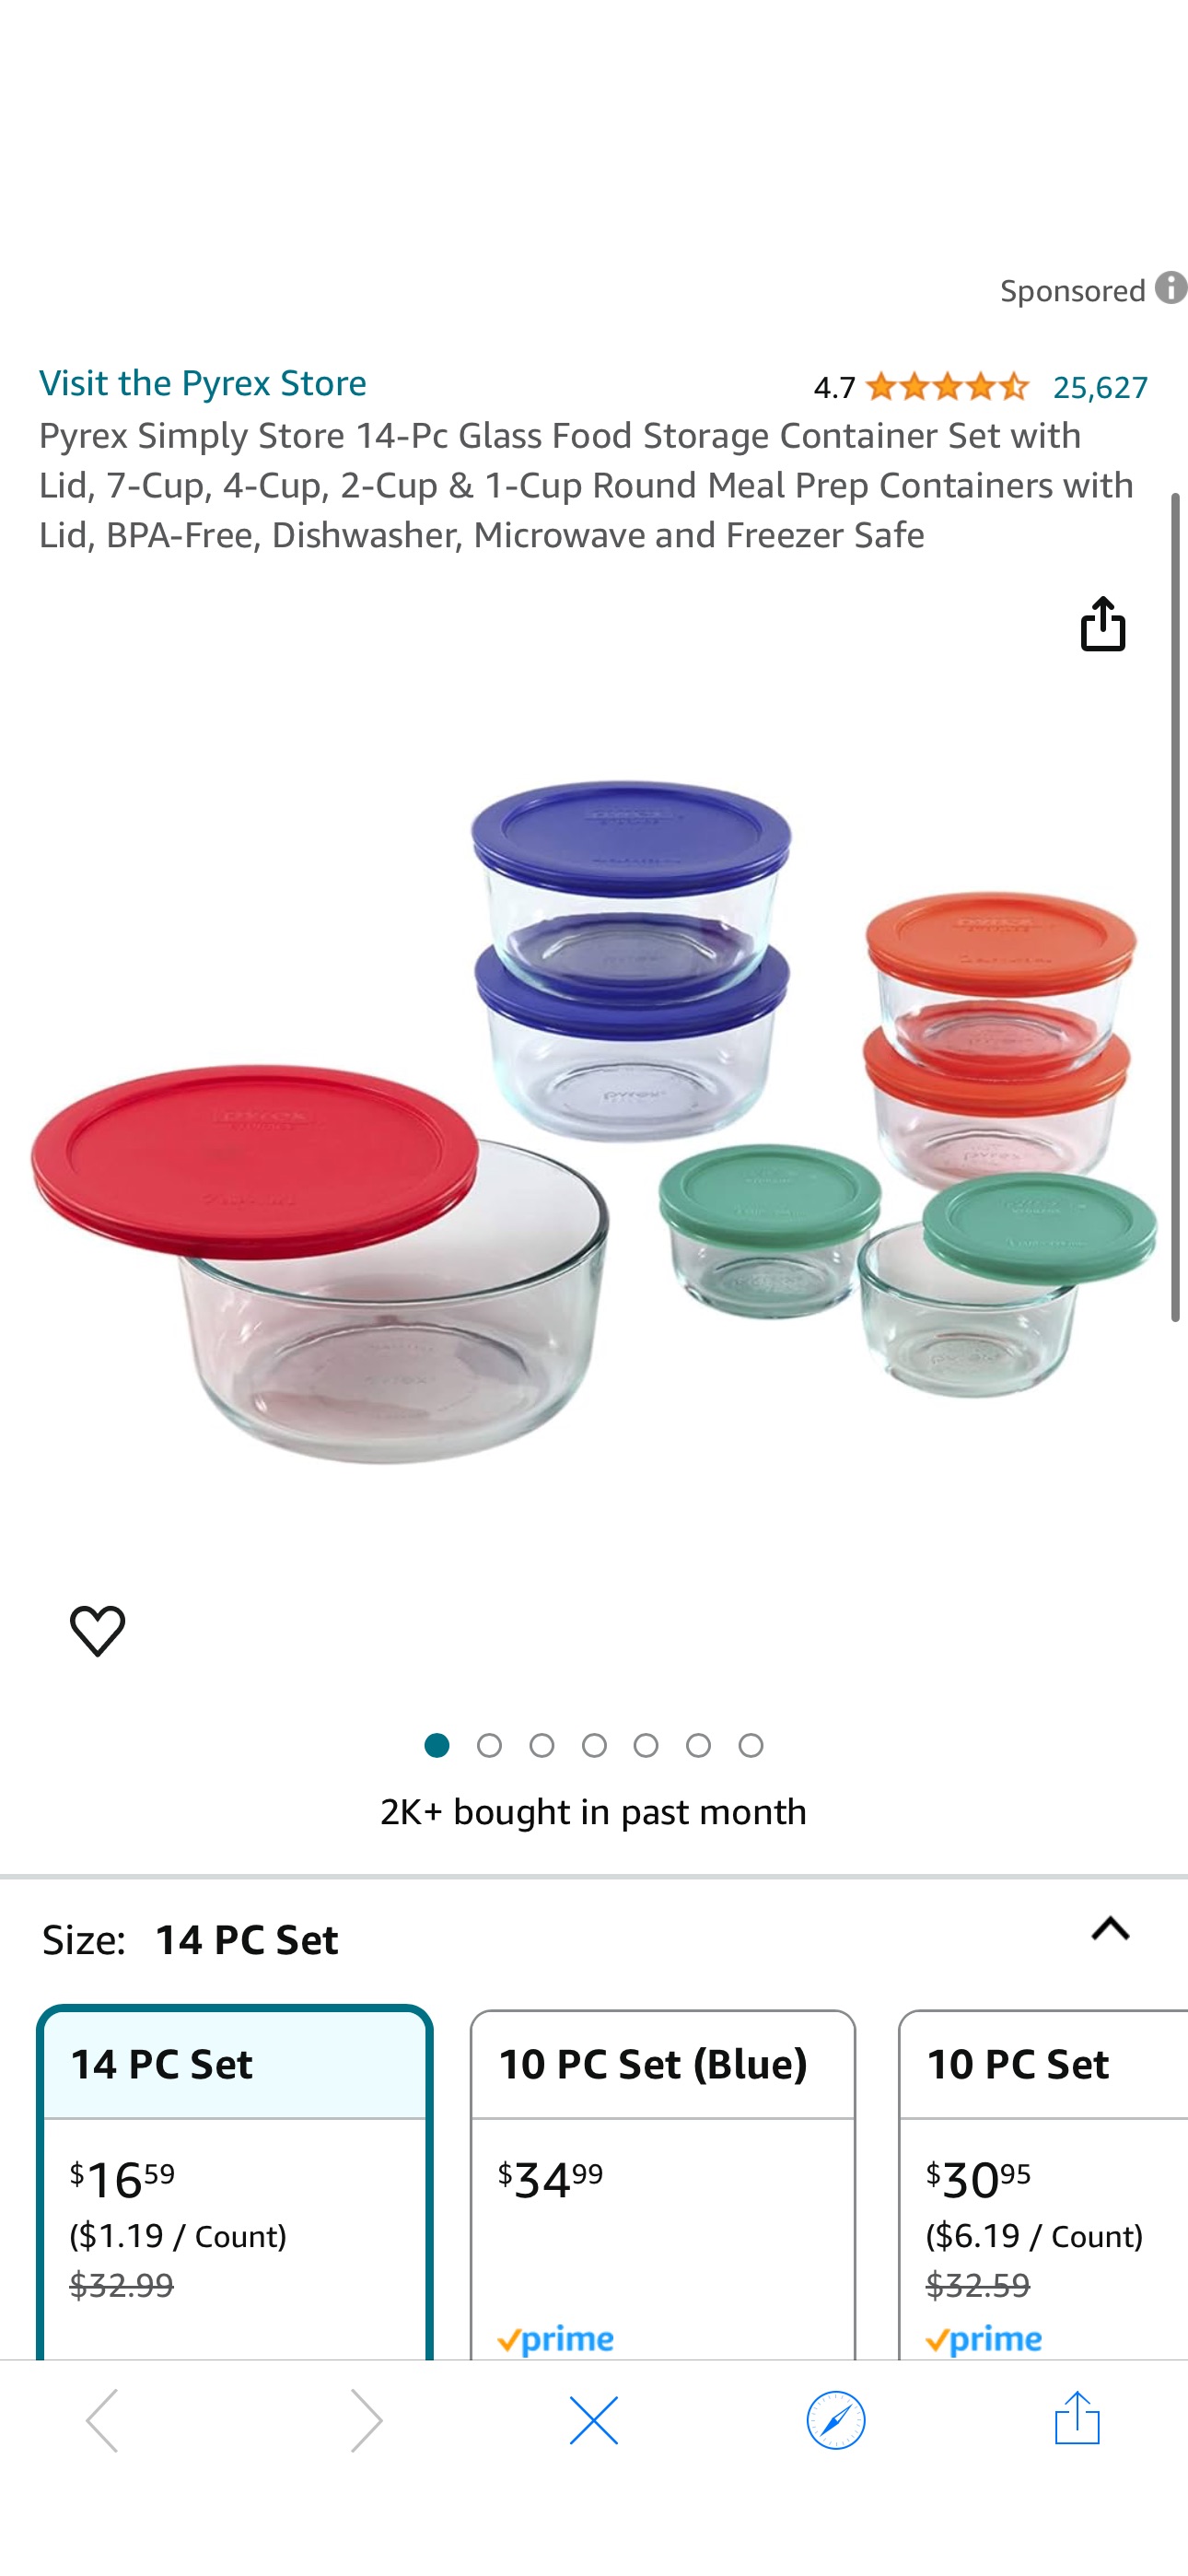 Amazon.com: Pyrex Simply Store 14-Pc Glass Food Storage Container Set with Lid, 7-Cup, 4-Cup, 2-Cup & 1-Cup Round Meal Prep Containers with Lid, BPA-Free, Dishwasher, Microwave and Freezer Safe: Home 